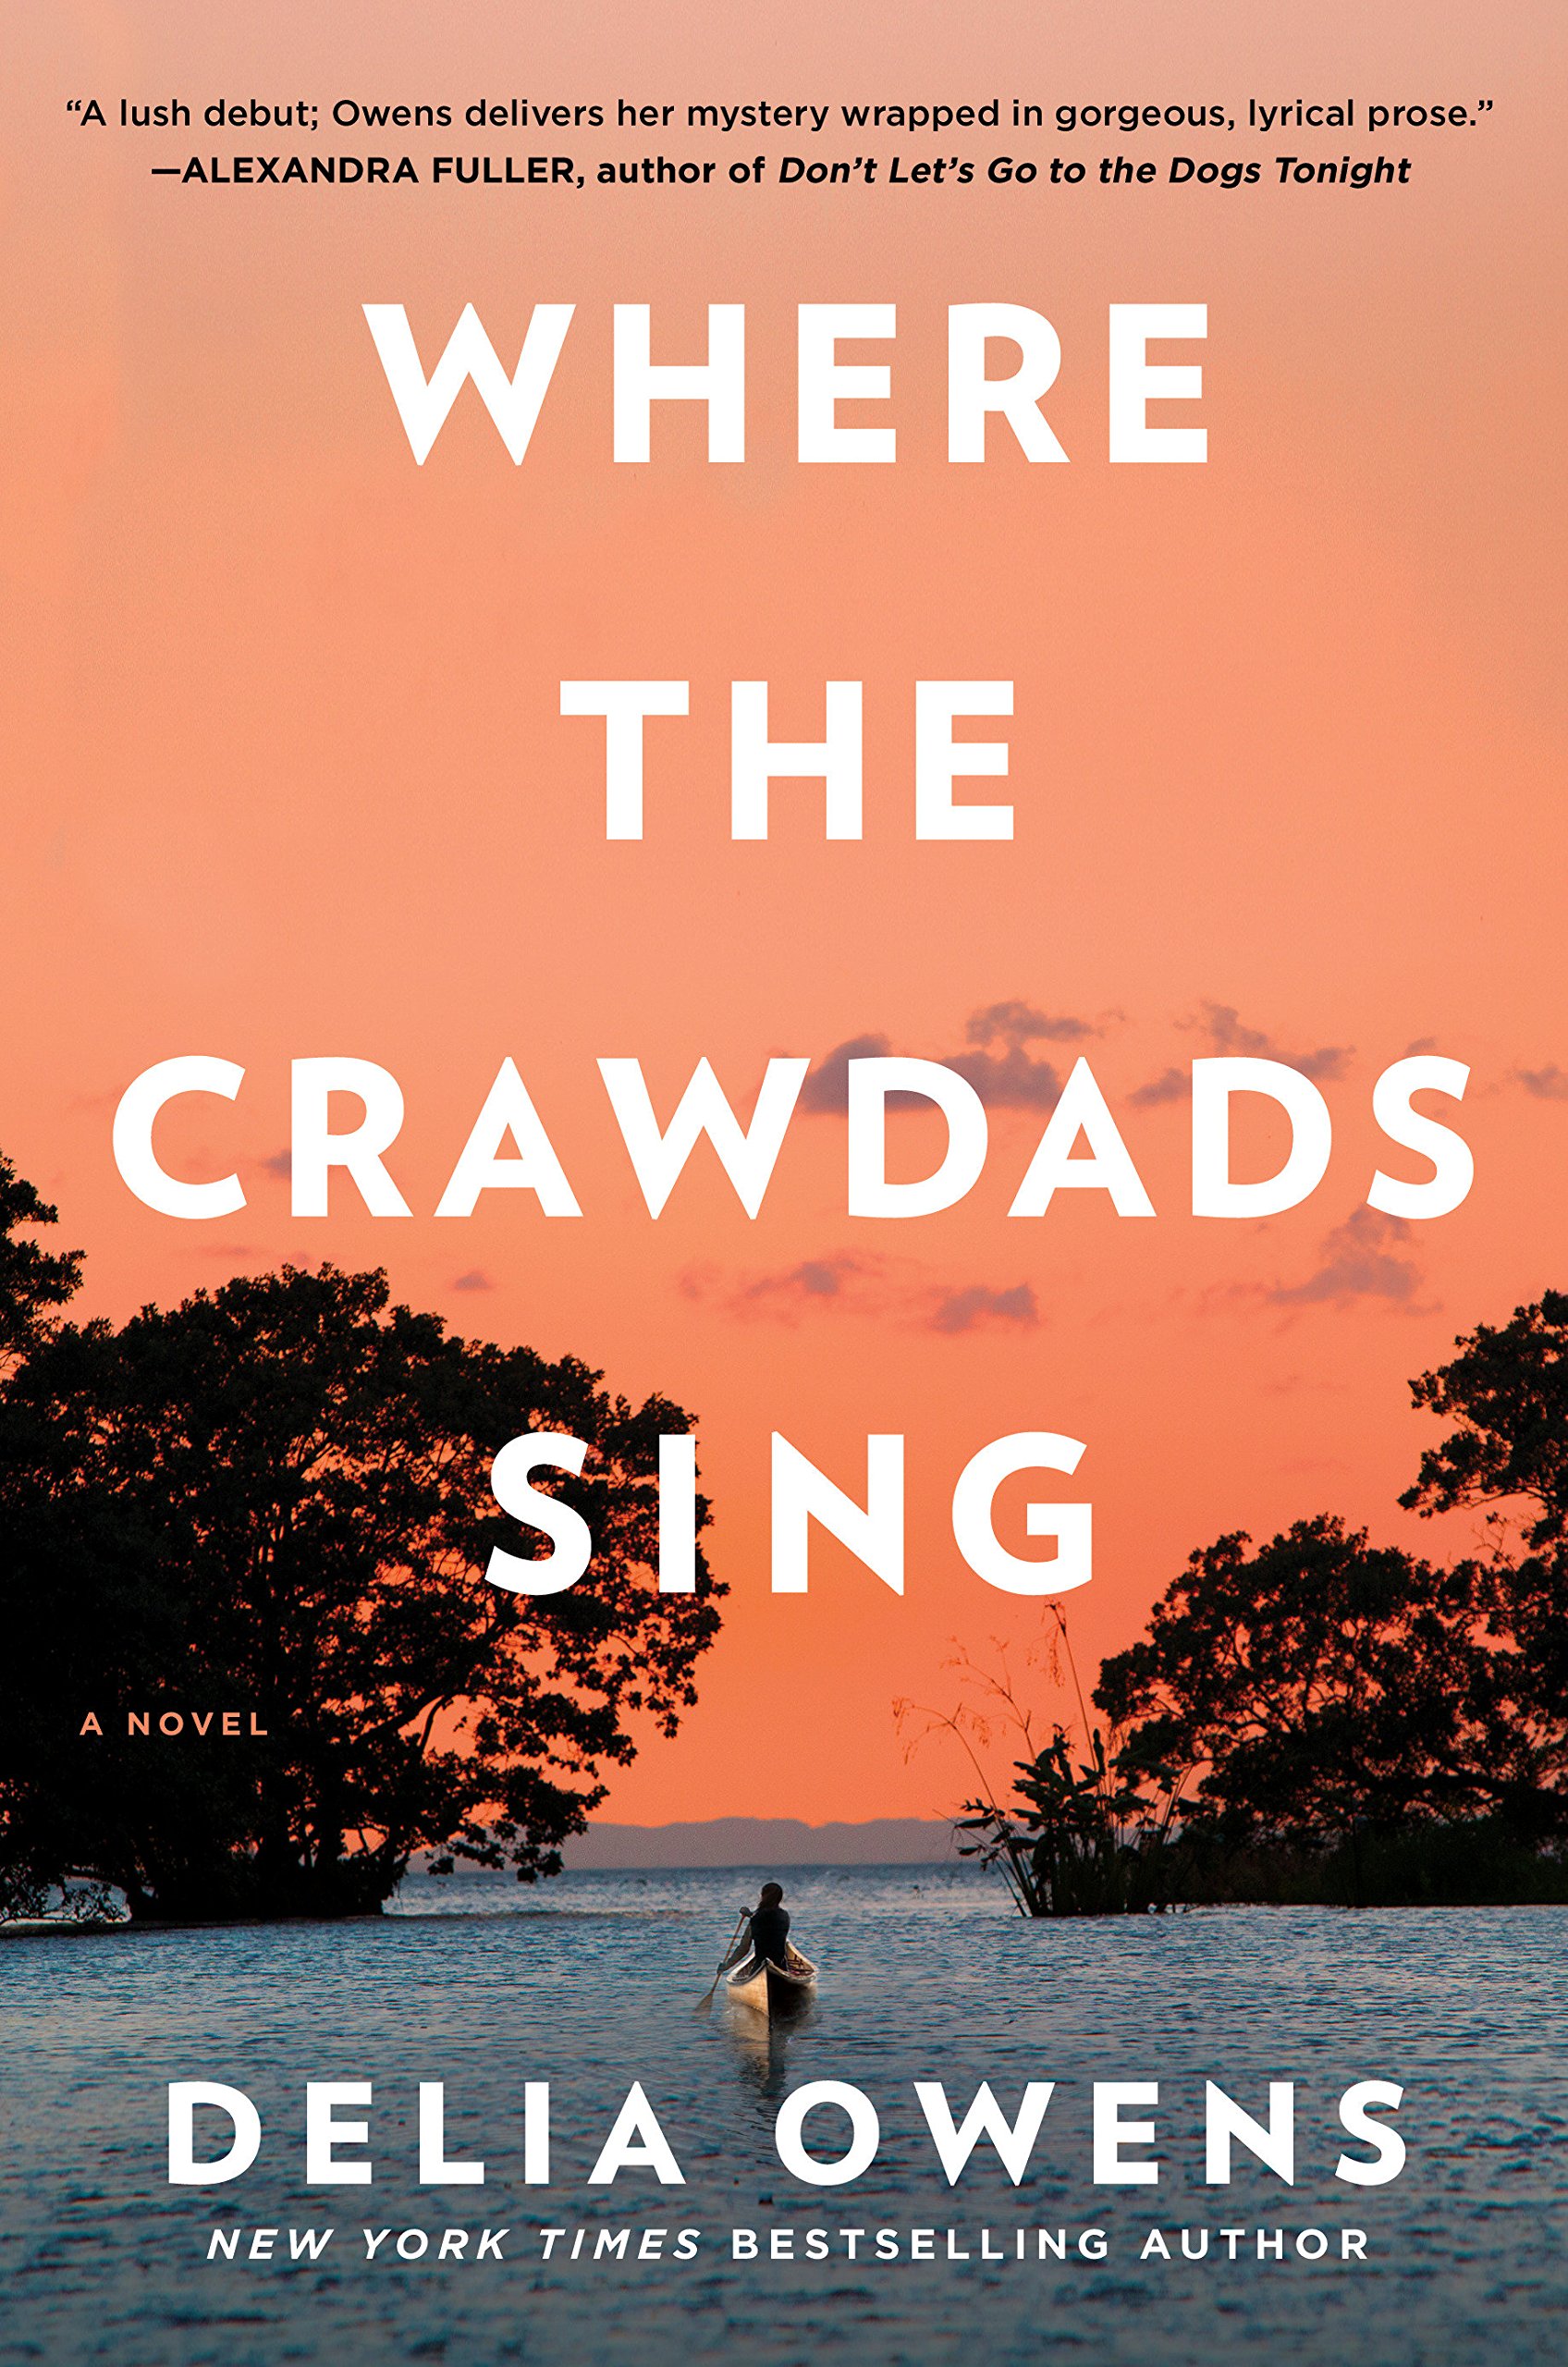 Book Marks reviews of Where the Crawdads Sing by Delia Owens Book Marks